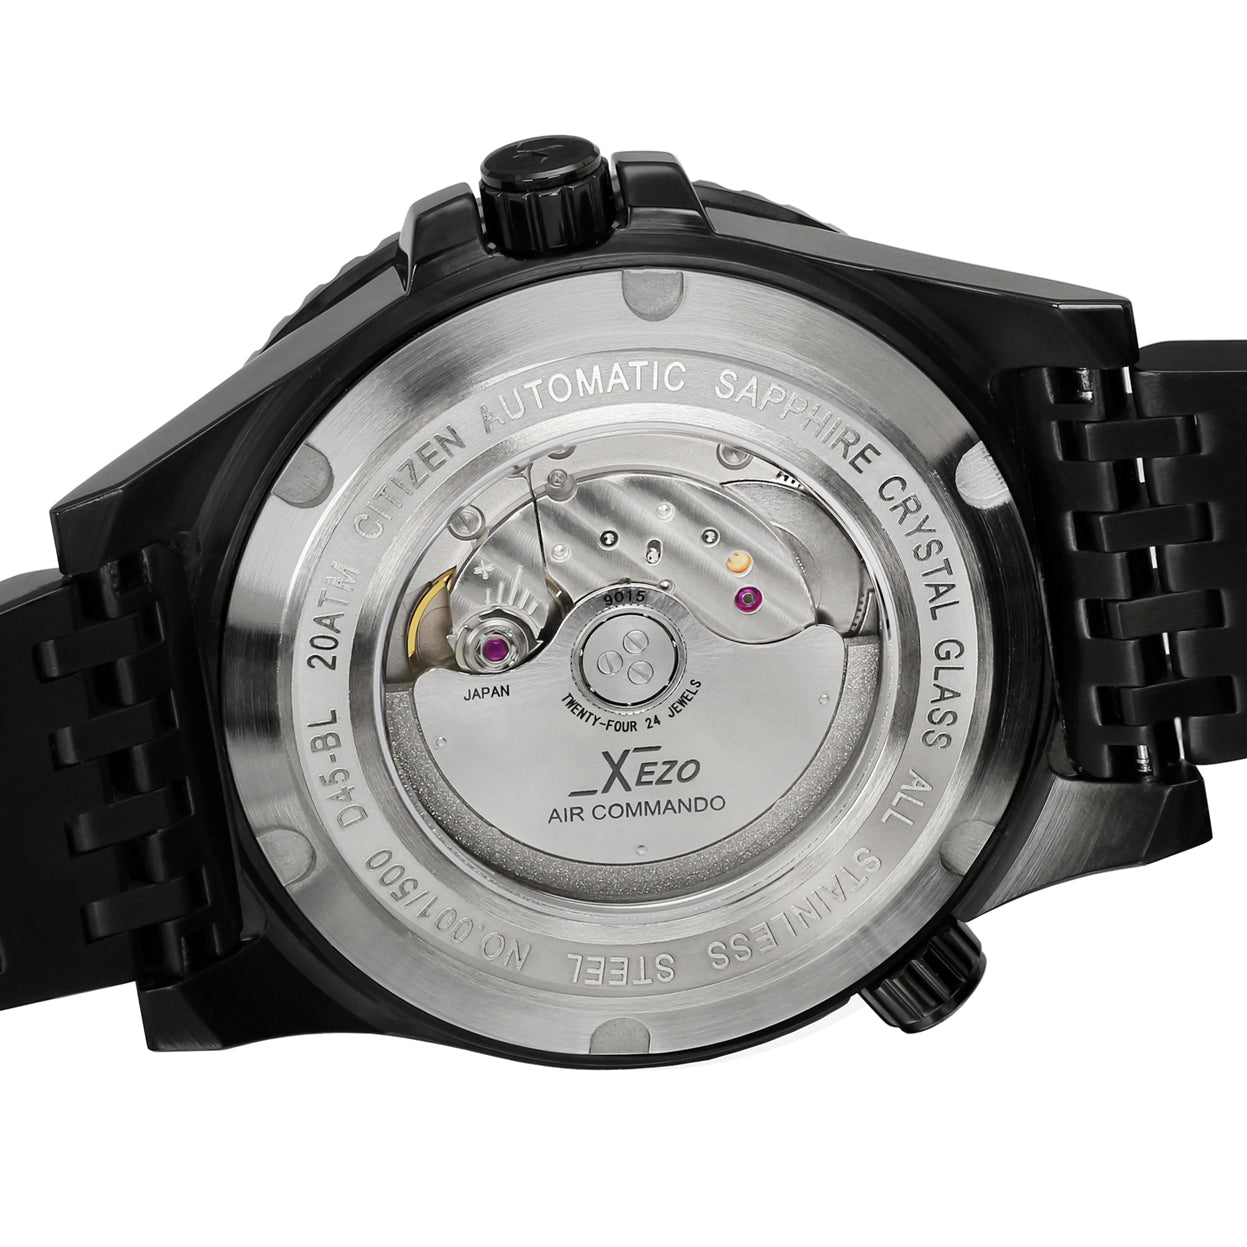 Xezo - Case back of the Air Commando D45-BL watch